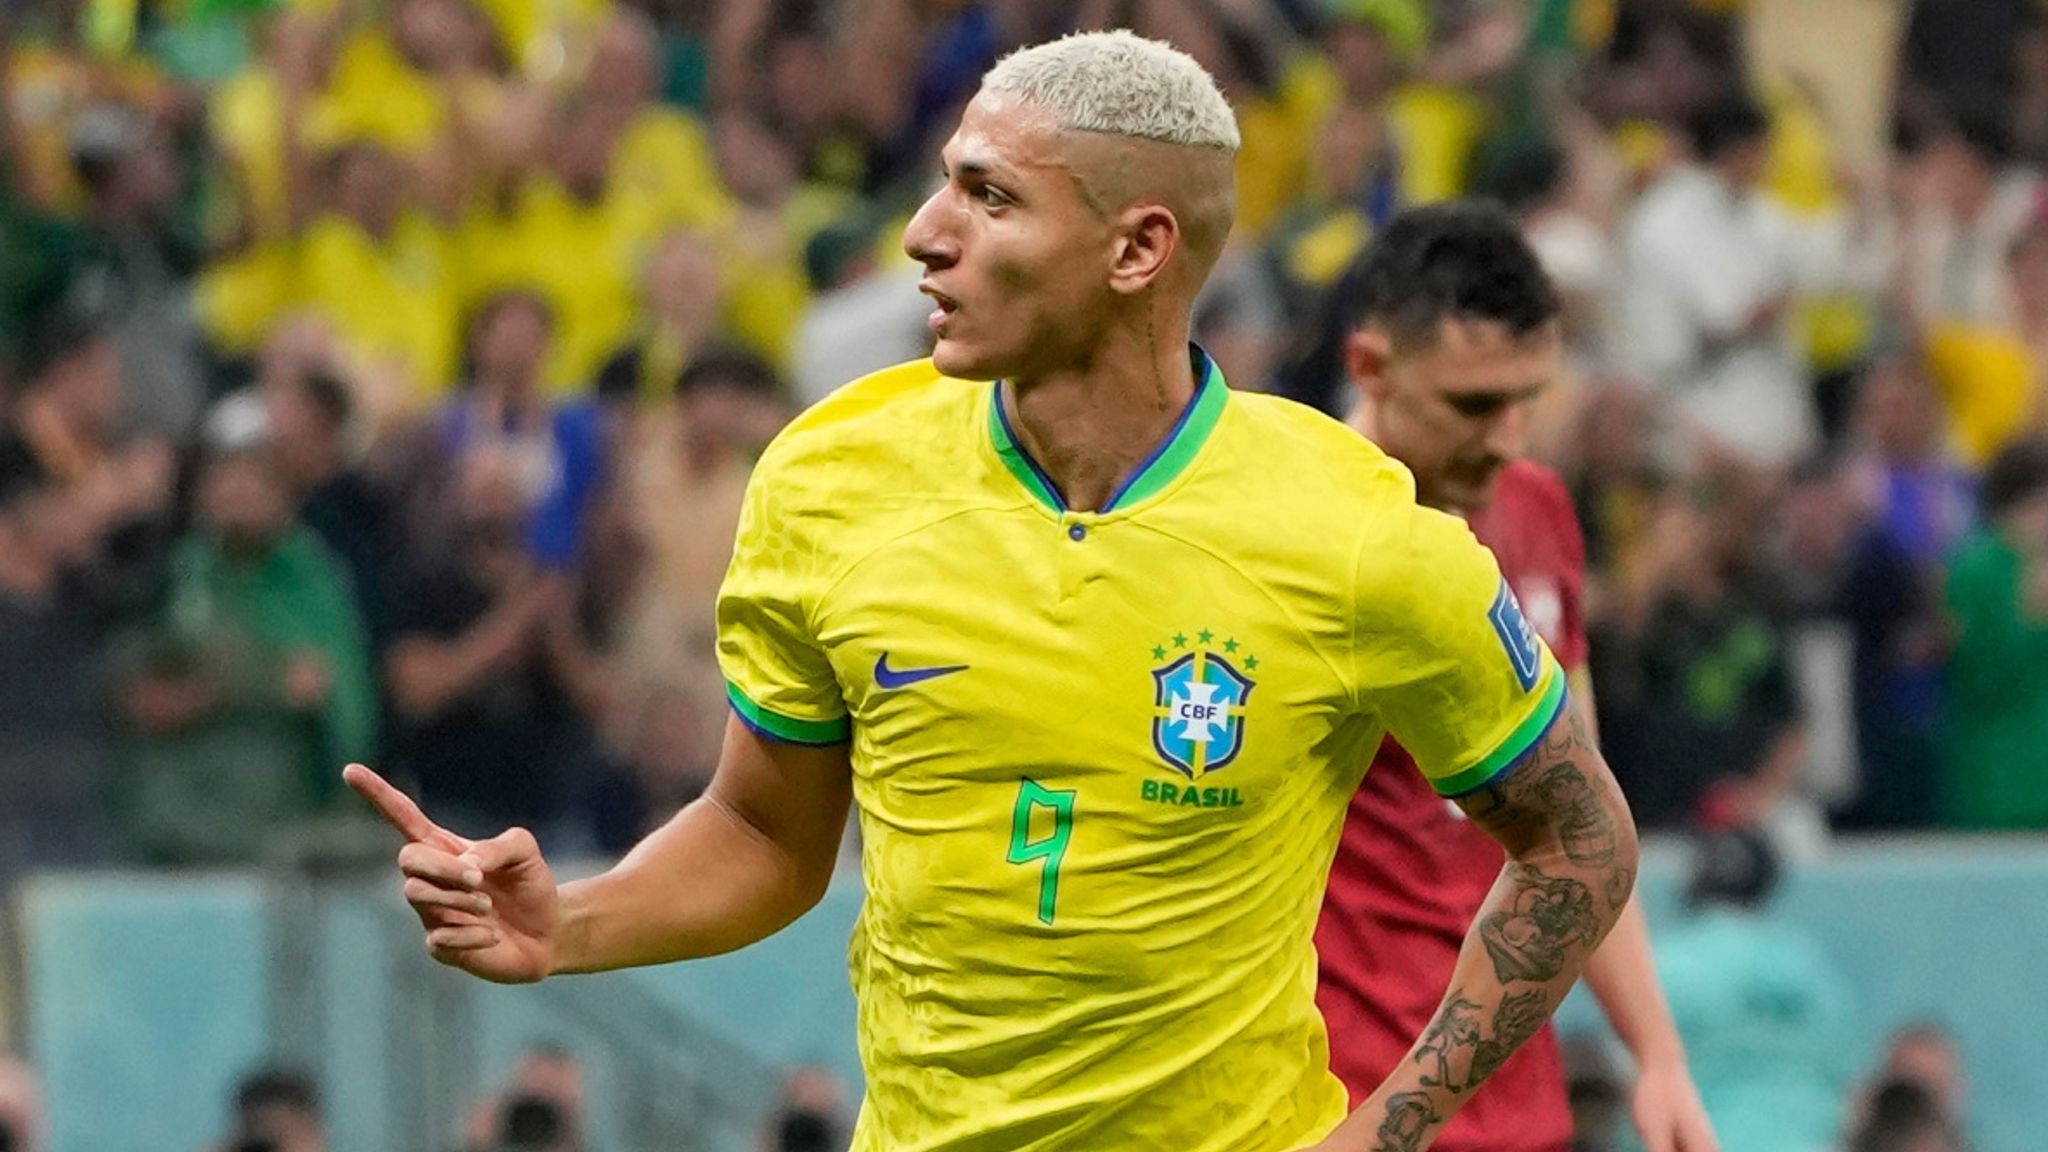 Brazil 2-0 Serbia: Richarlison double sees World Cup favourites